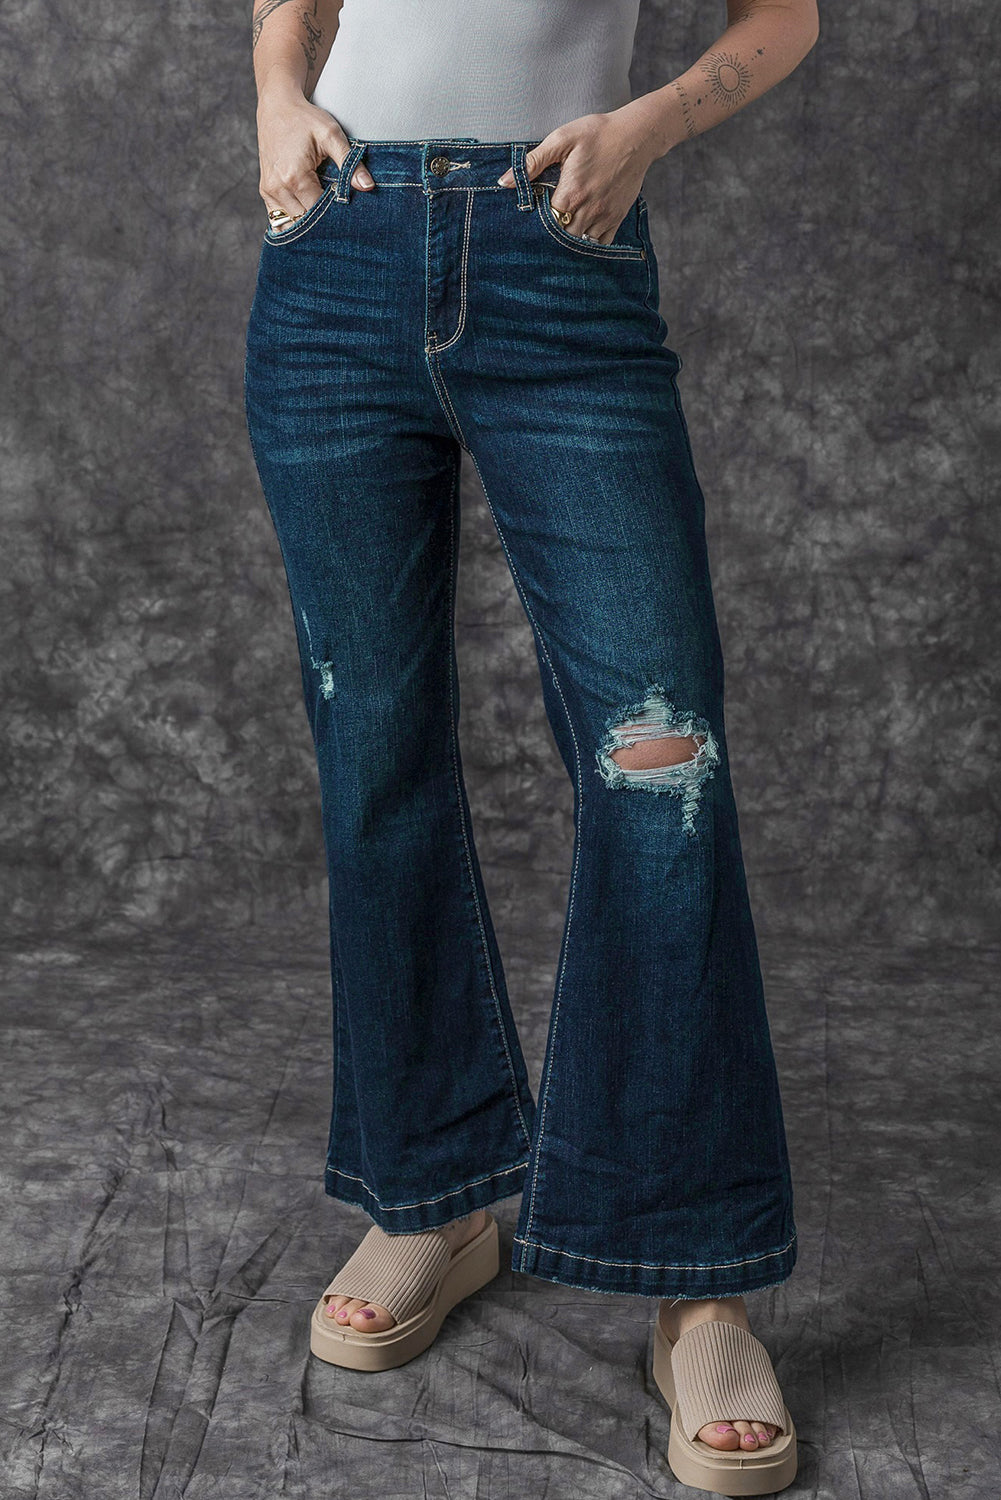 Real Teal High Rise Ripped Bell Bottom Jeans - SELFTRITSS